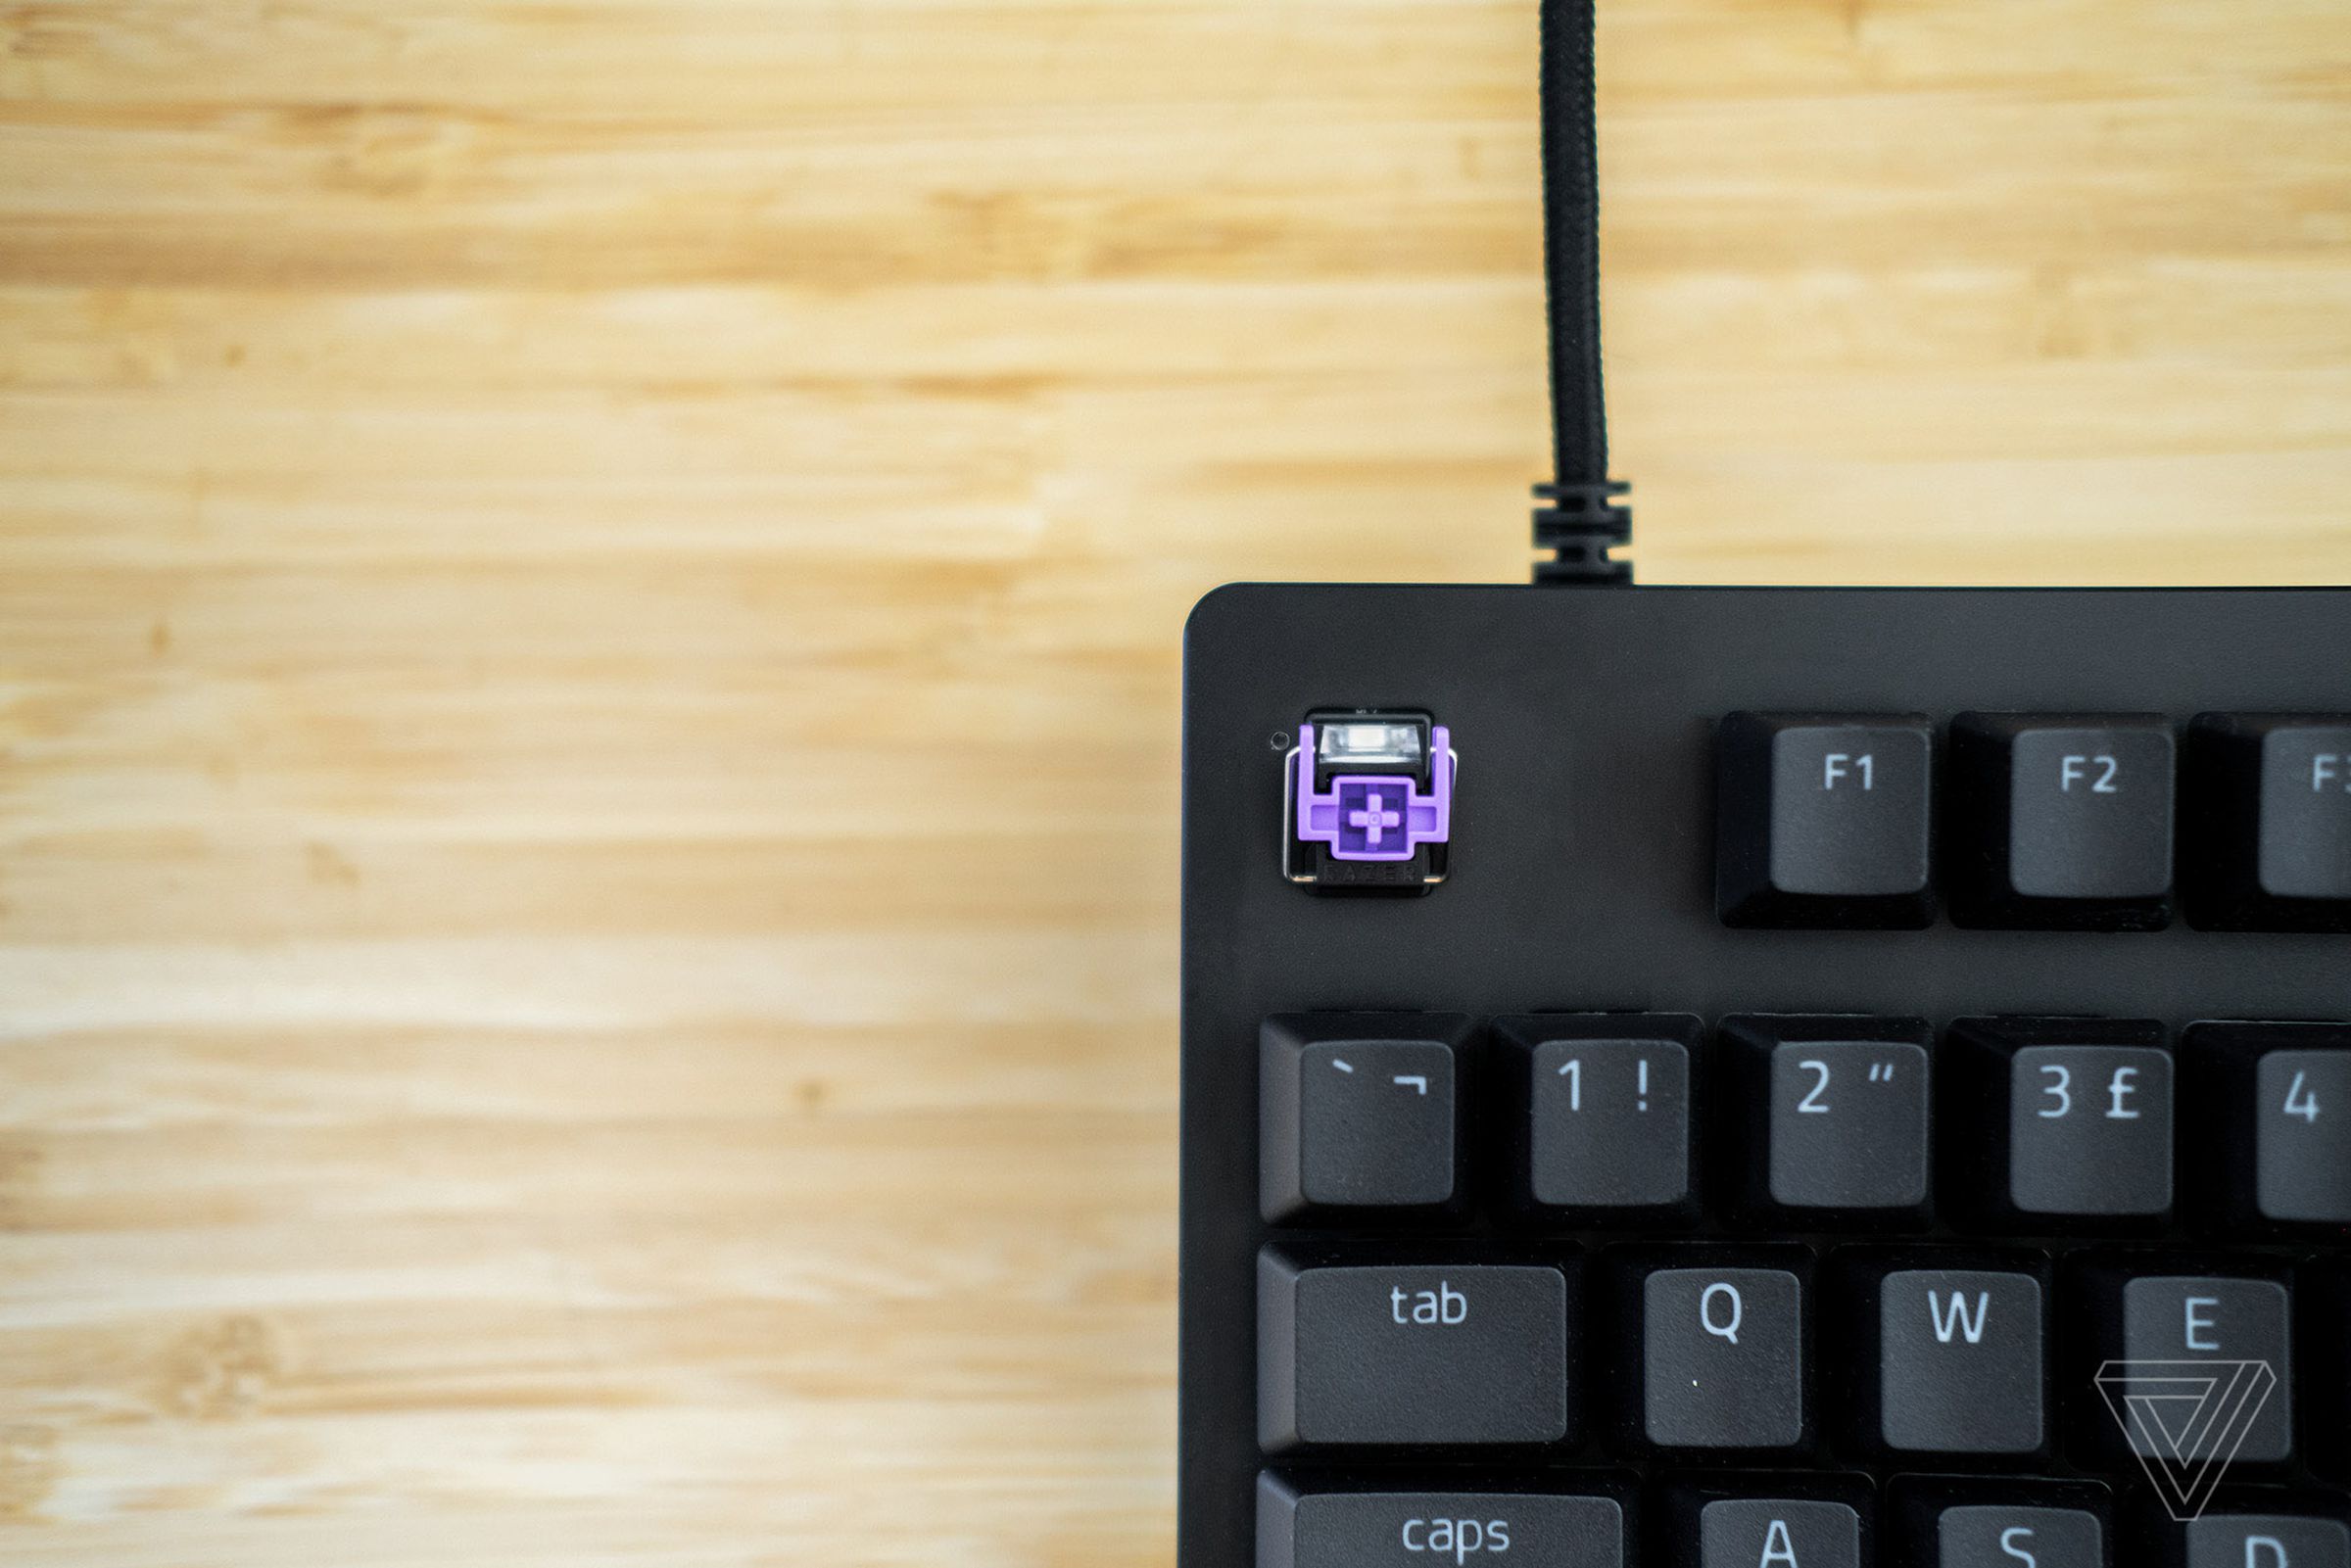 The switches should be compatible with most keycaps.